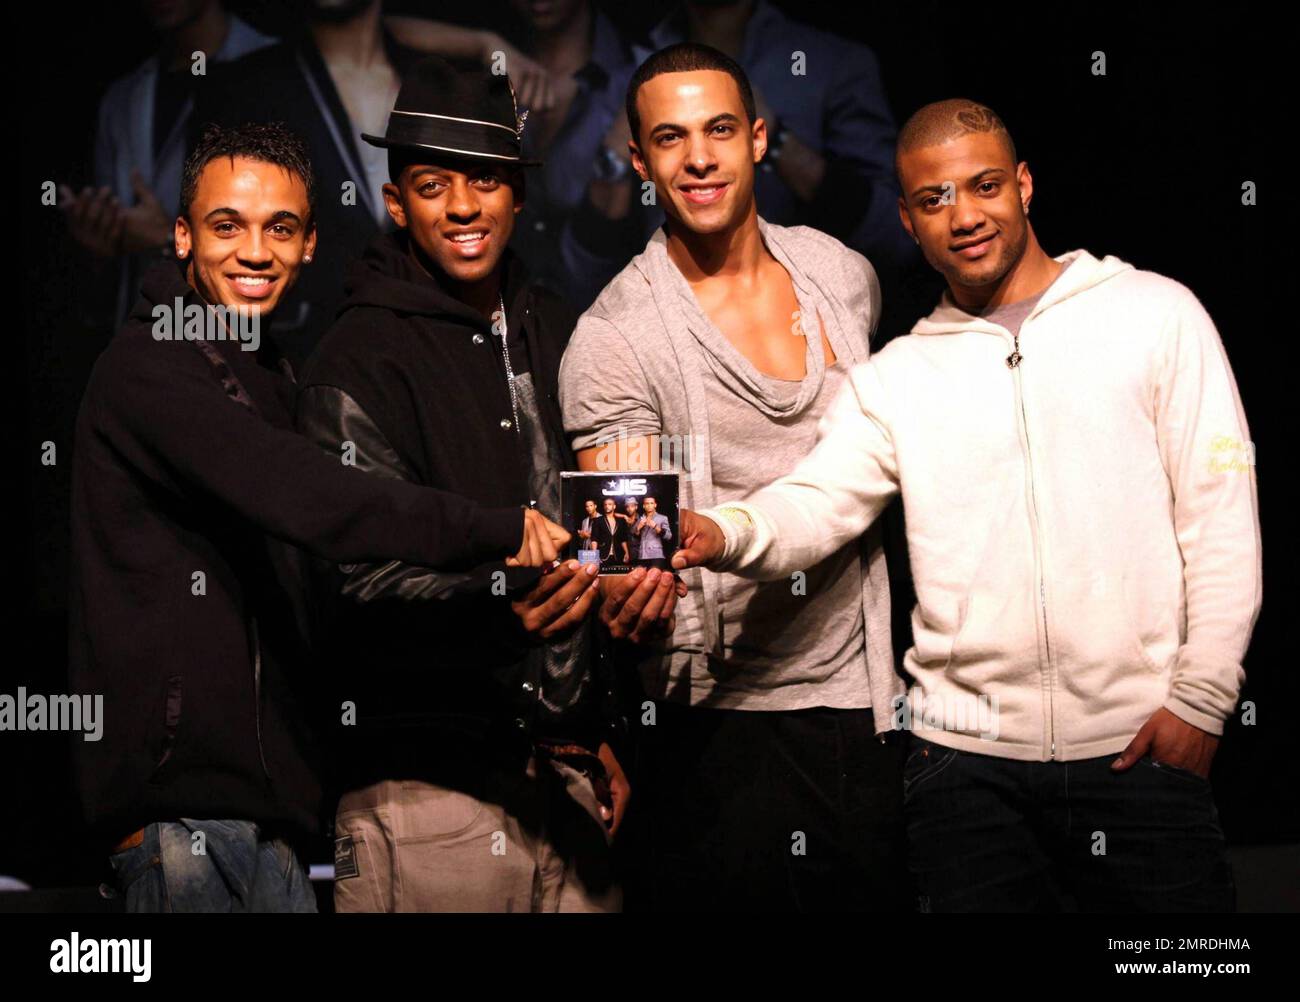 Pop foursome JLS meet fans and sign copies of their new album 'Outta This World' at Heaven. The UK boy band, whose initials stand for 'Jack the Lad Swing,' was a runner up in the fifth series of 'X Factor' in 2008. London, UK. 11/22/10. Stock Photo